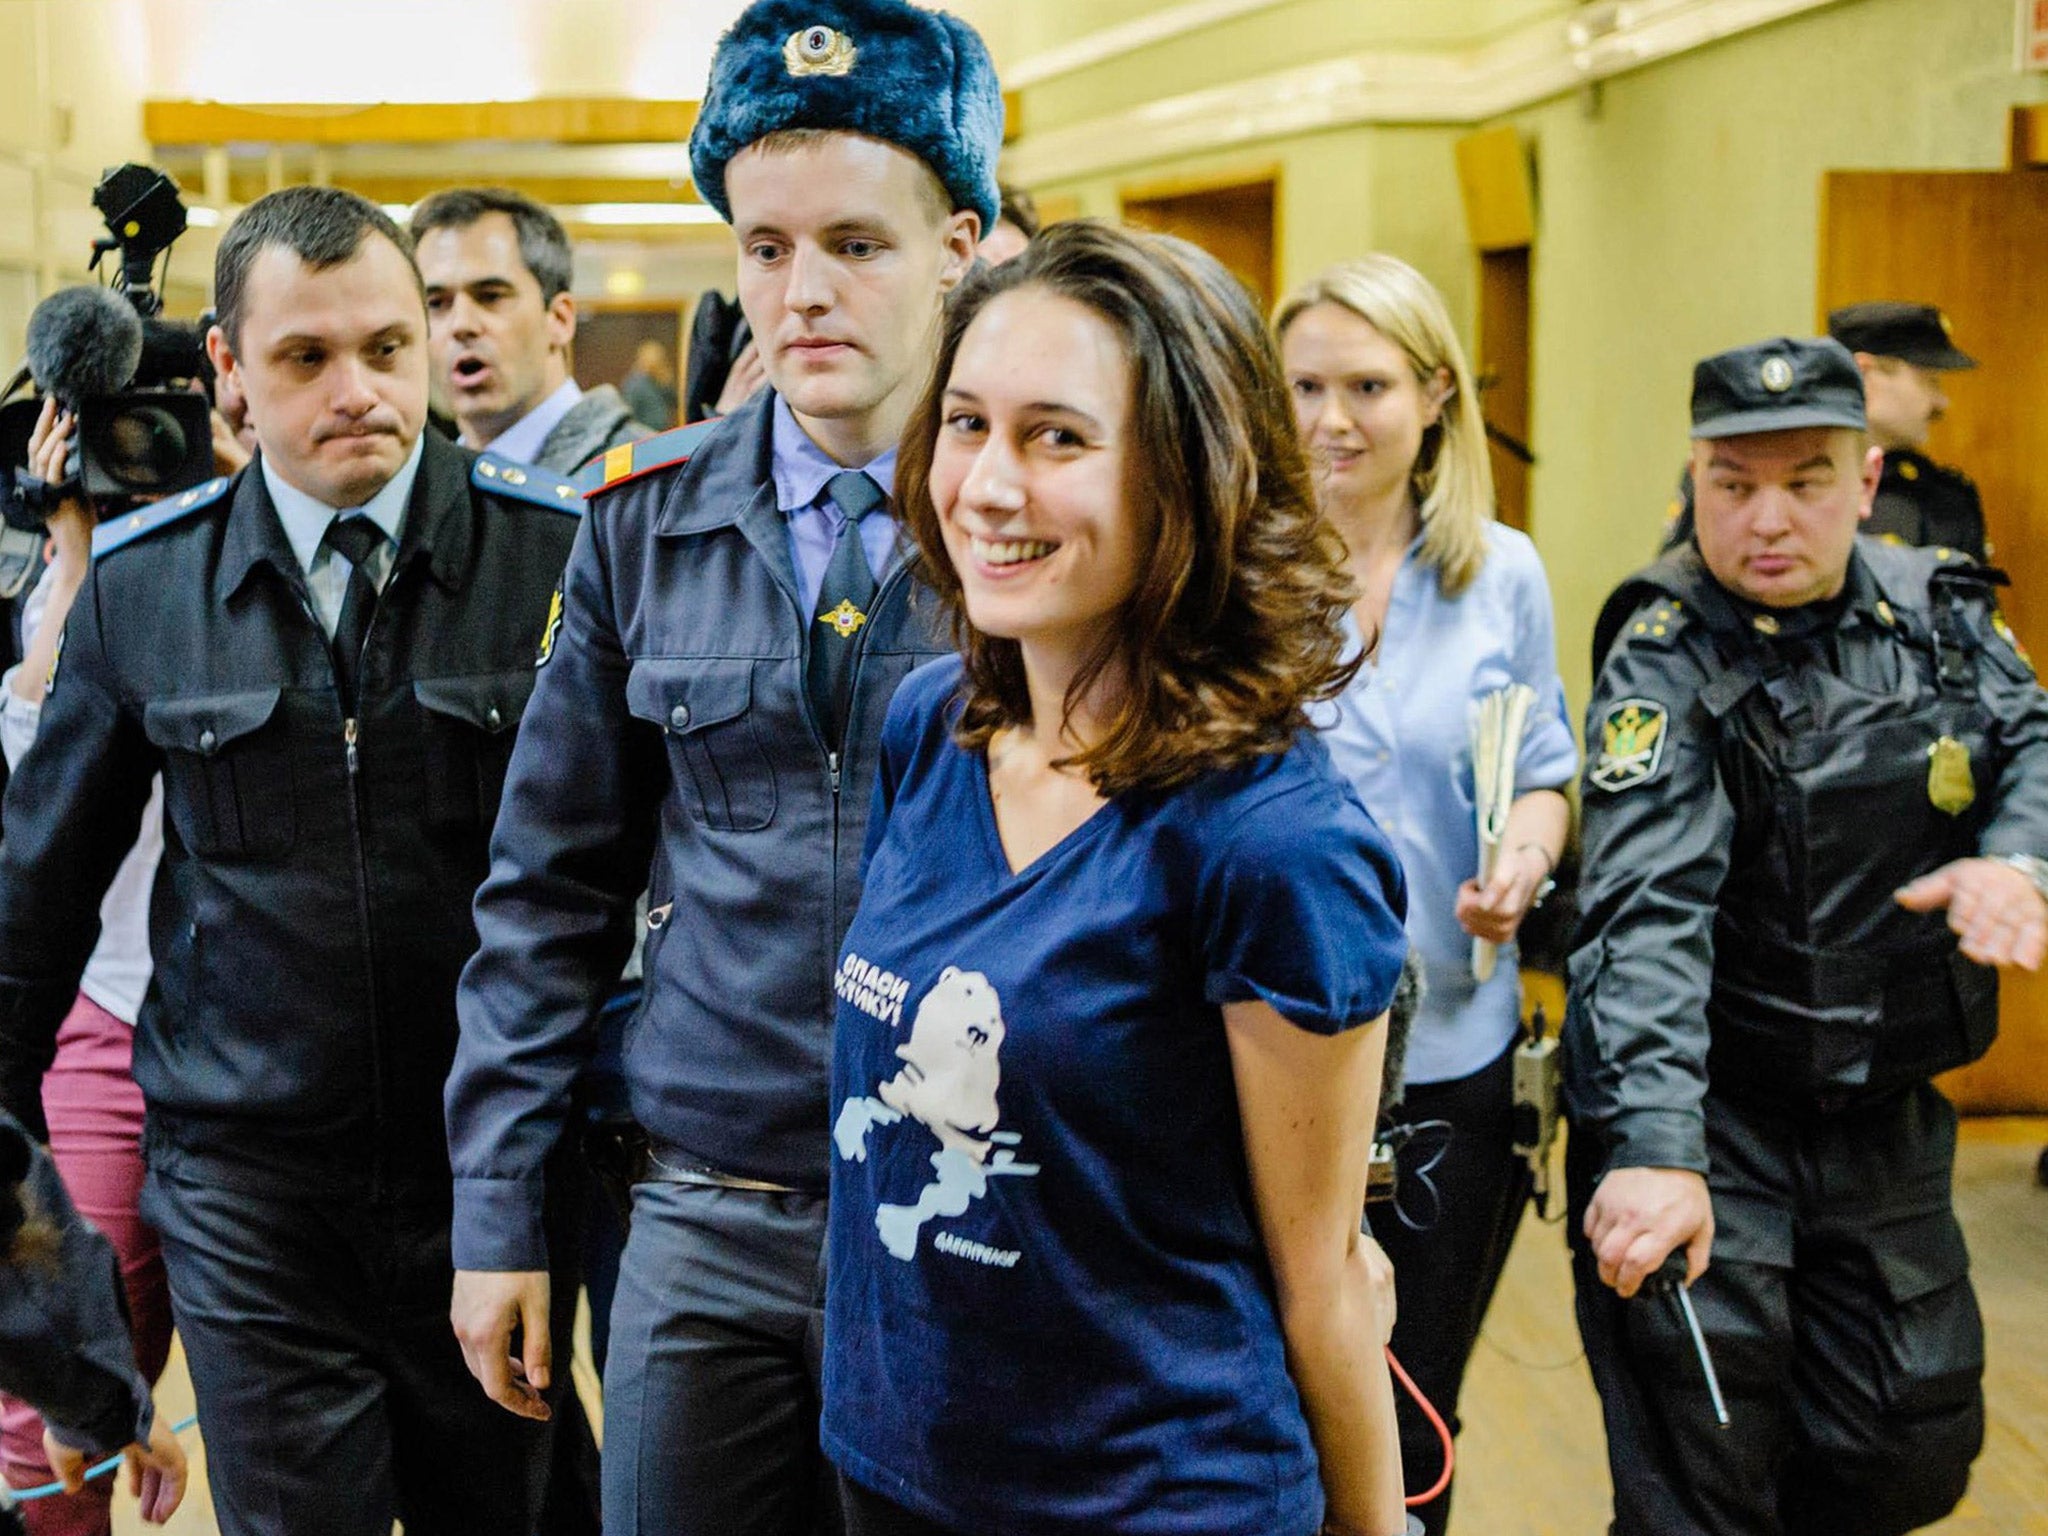 Alex Harris was one of the first 'Arctic 30' detainees to be granted bail